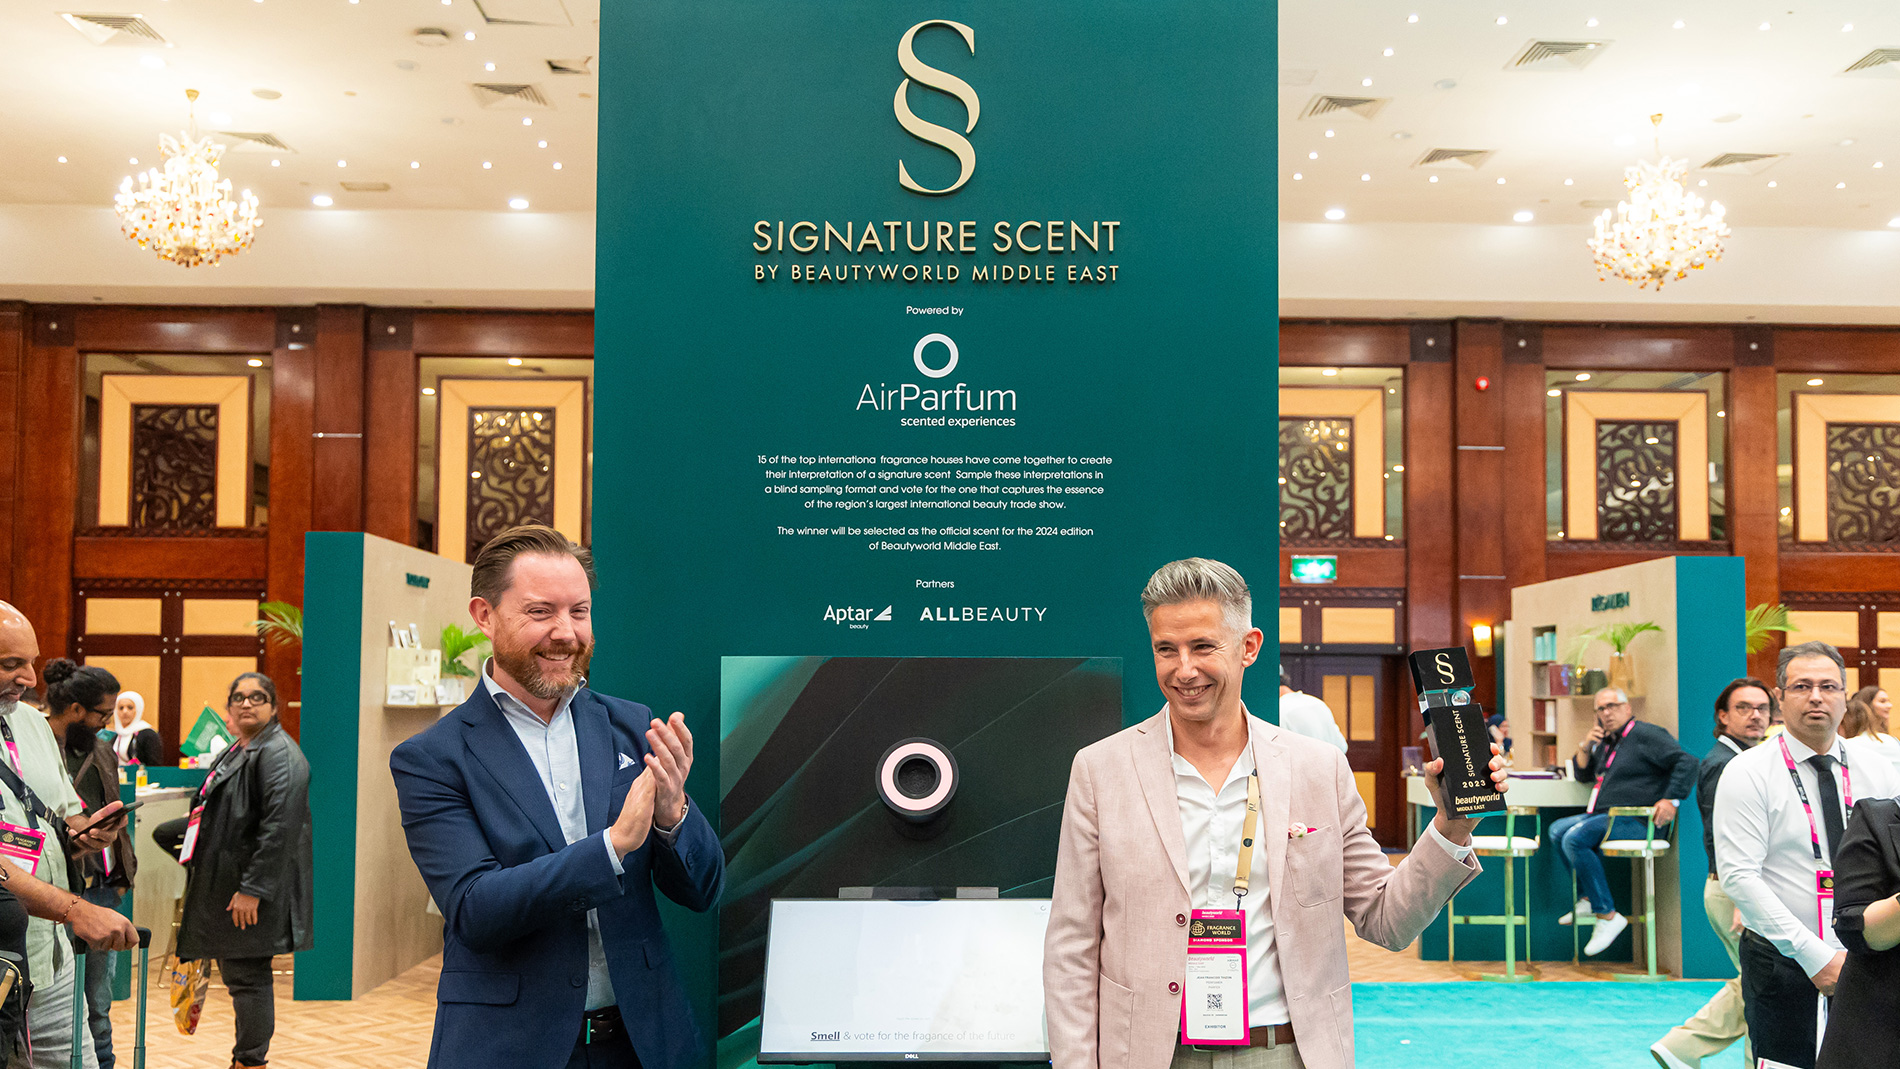 Beautyworld Middle East - Signature Scent